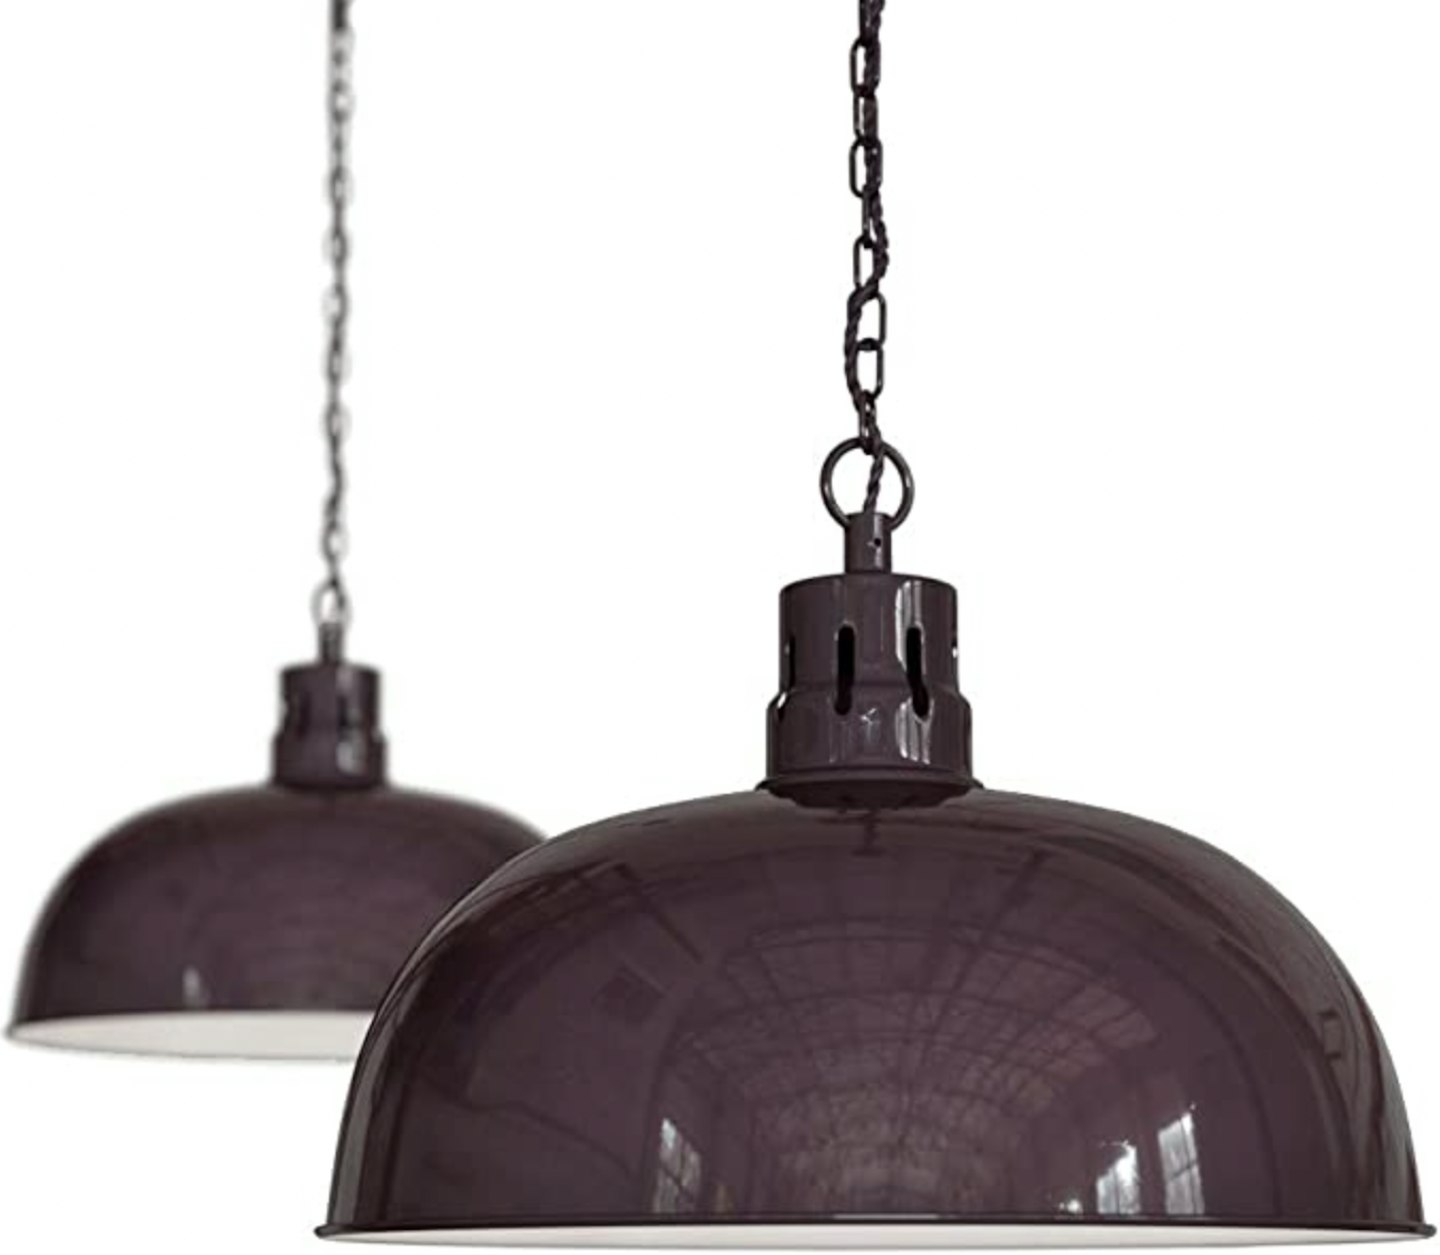 The Soho Lighting Company Store, Mulberry Rustic Dome Dining Room Pendant Light